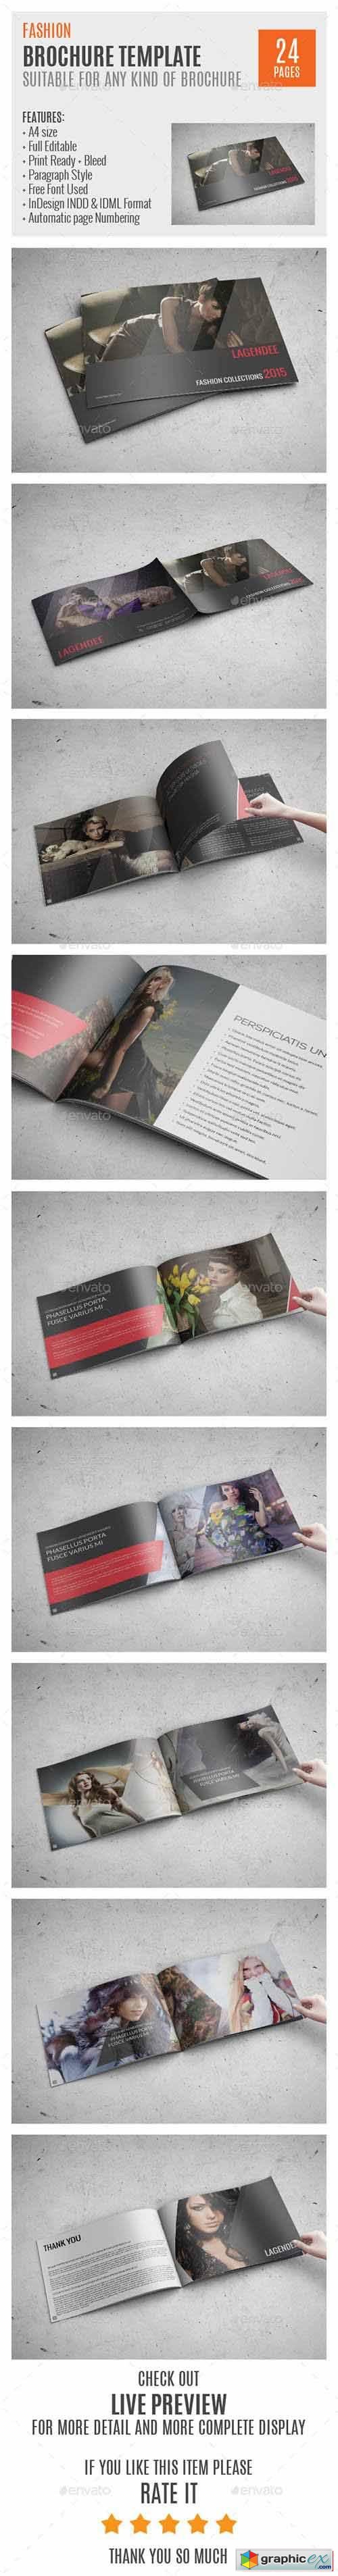 Fashion A4 InDesign Brochure Template 0040